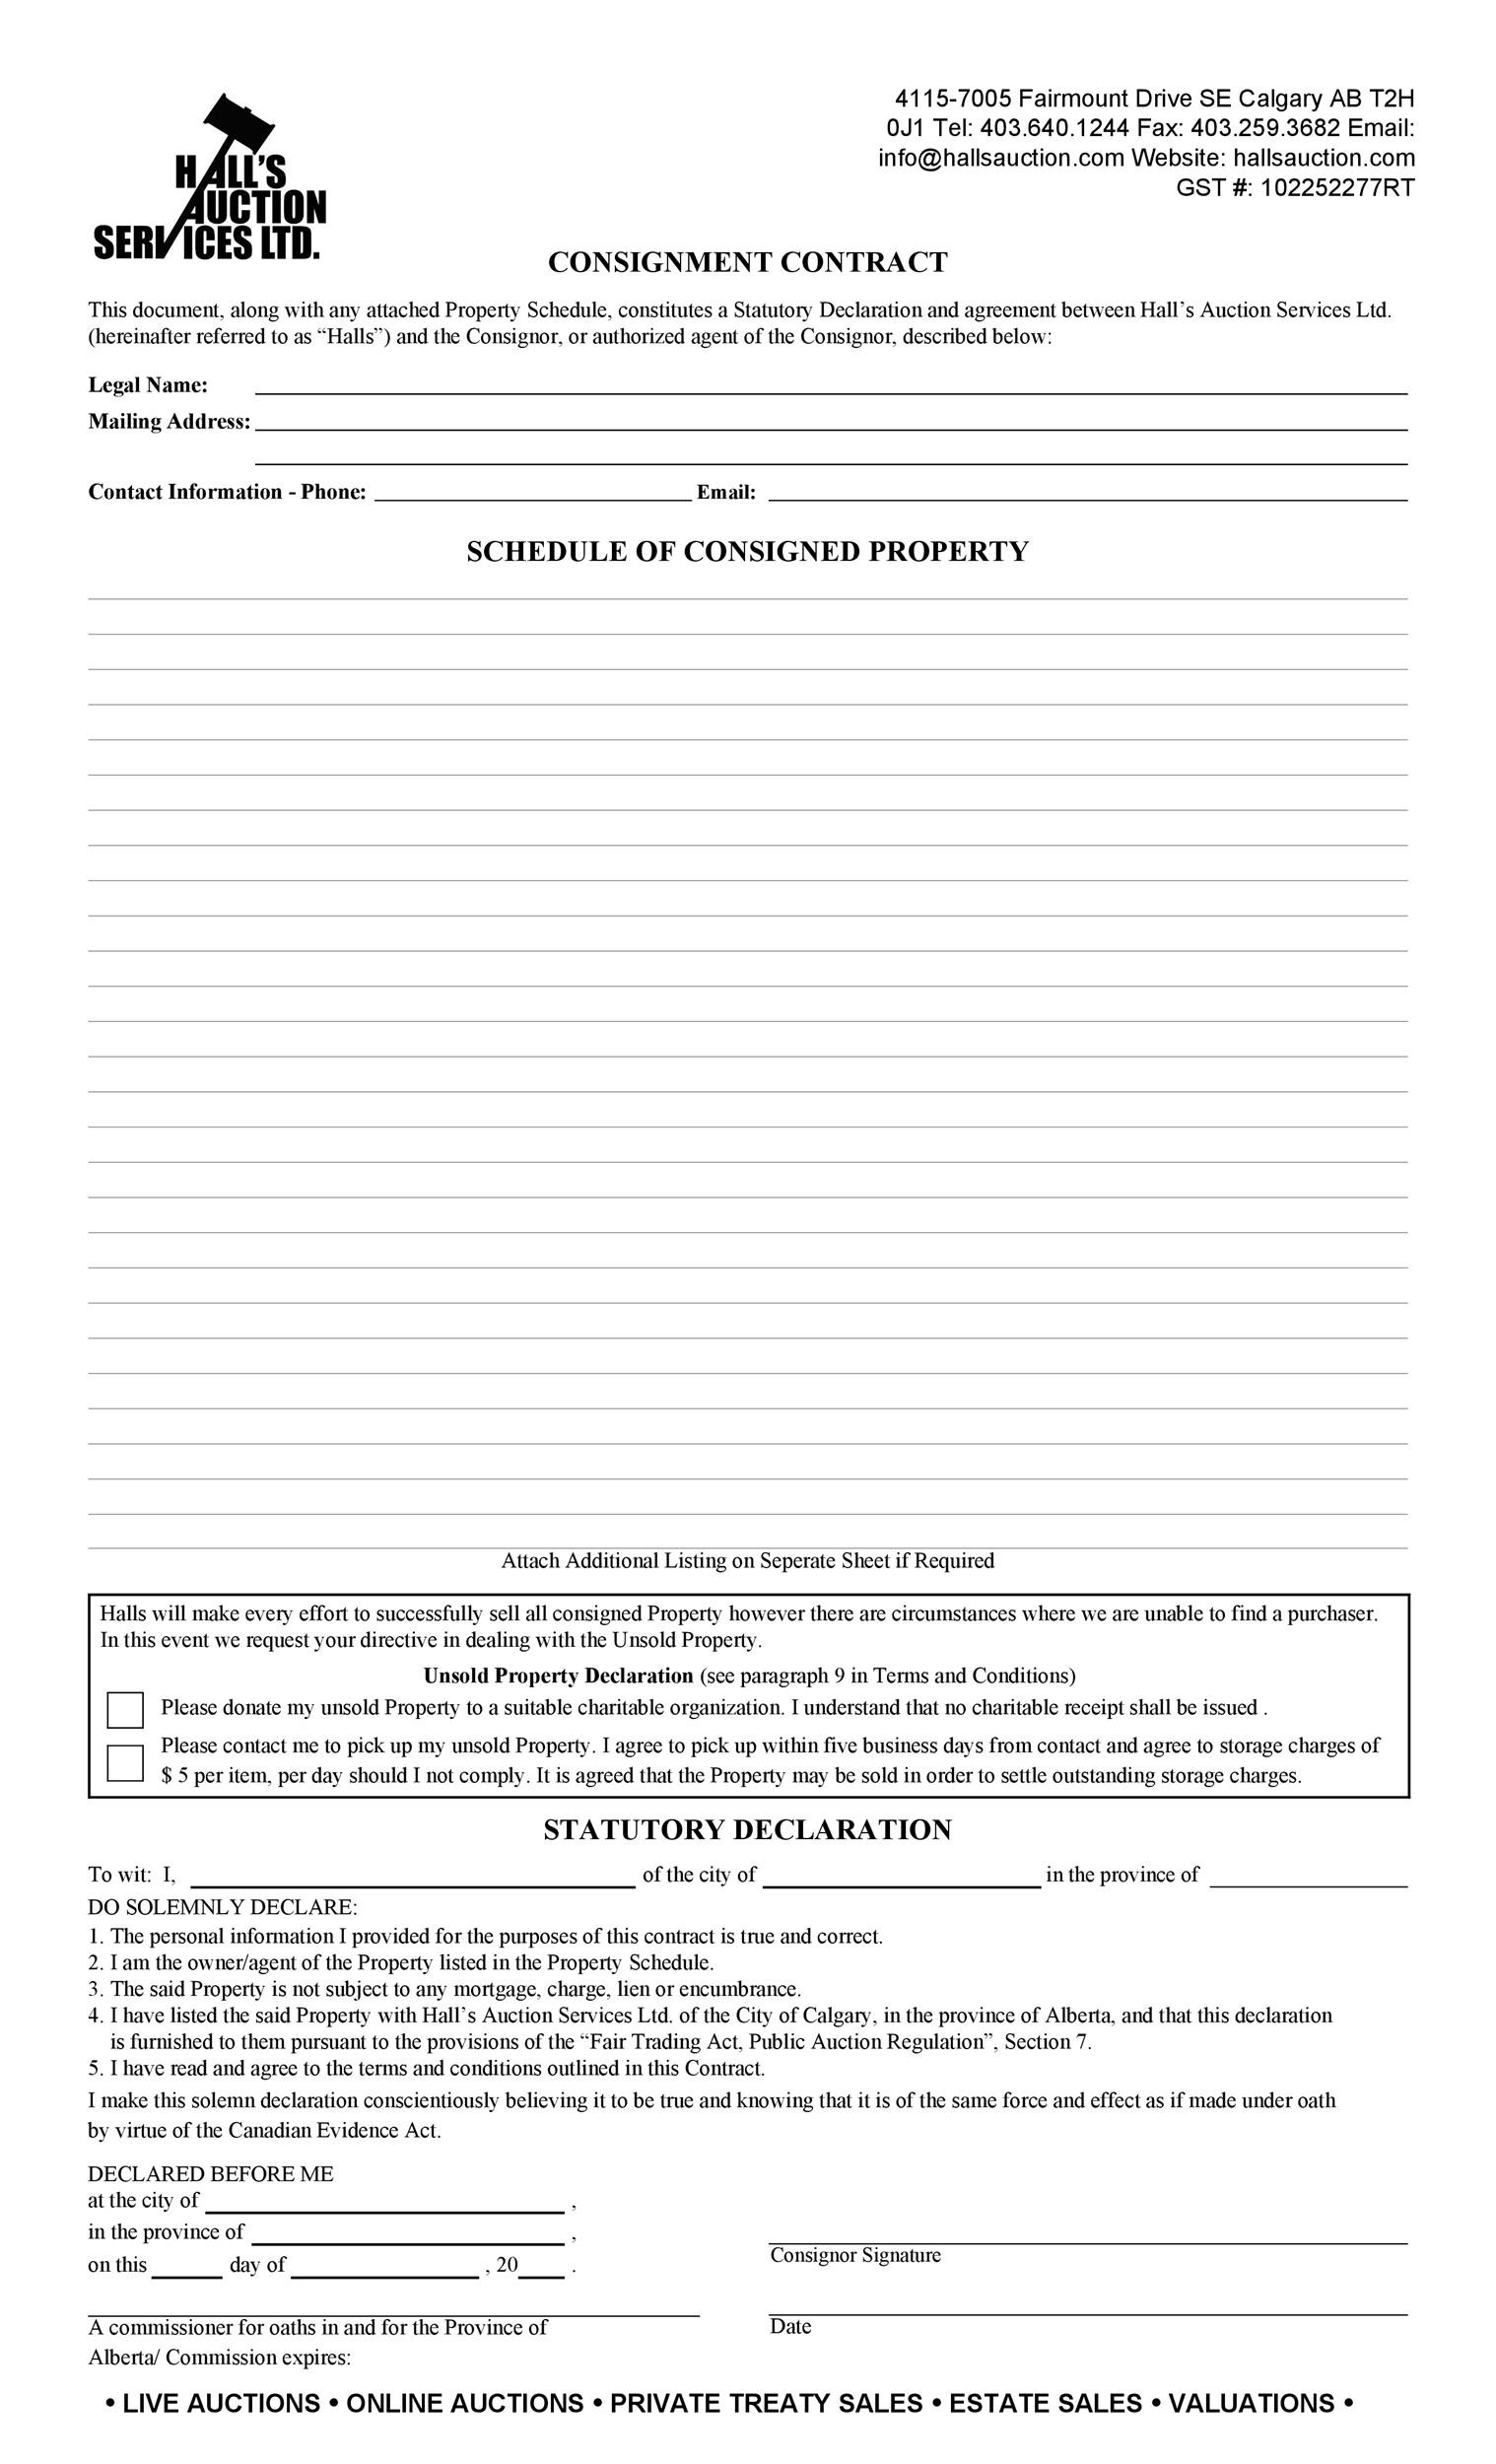 Free Consignment Agreement Template 31